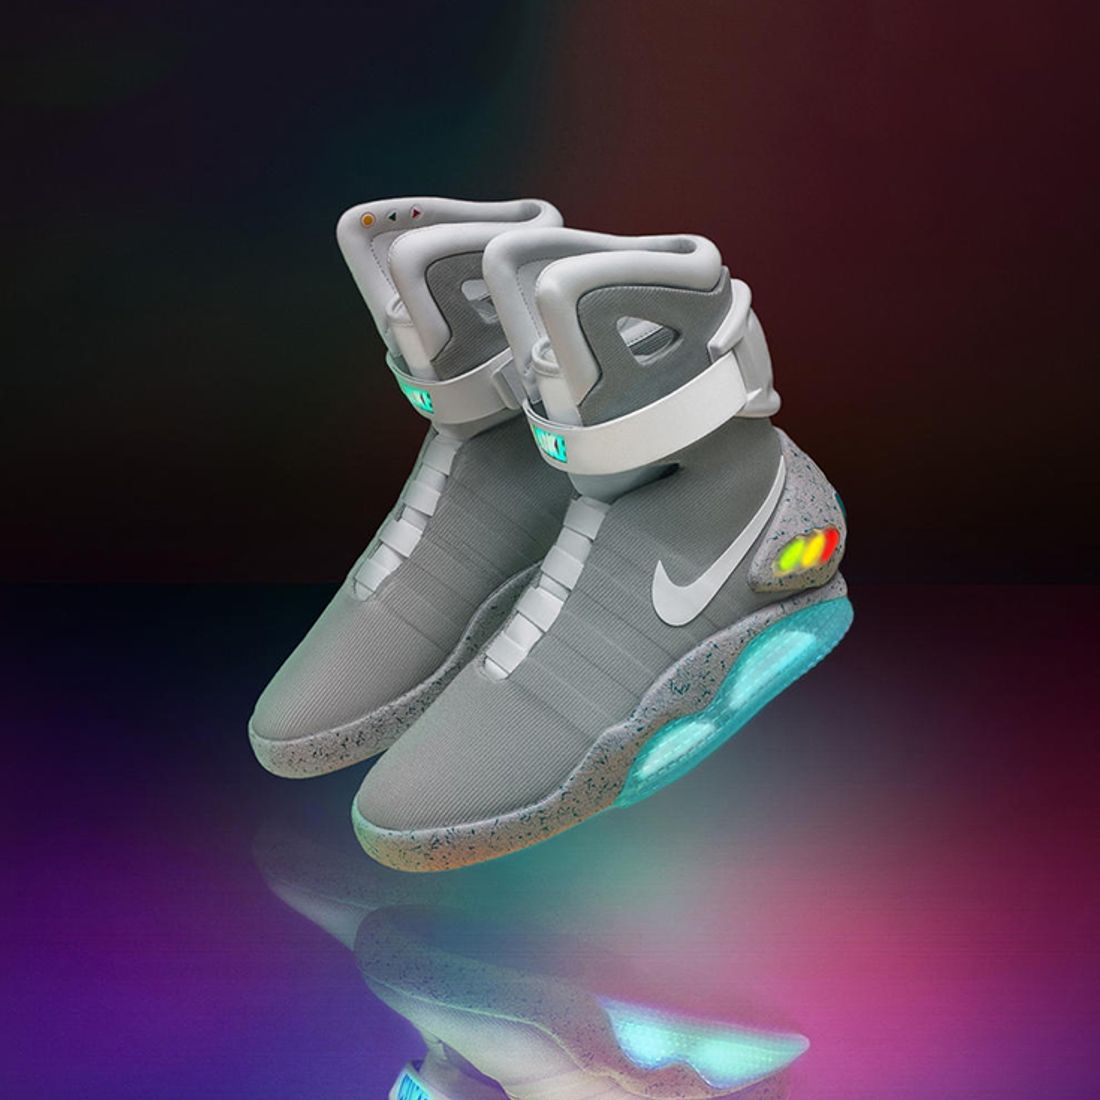 Modernizar diapositiva candidato 10 Years On: A Look Back at the Nike Air Mag's Long-Awaited 2011 Release -  Sneaker Freaker